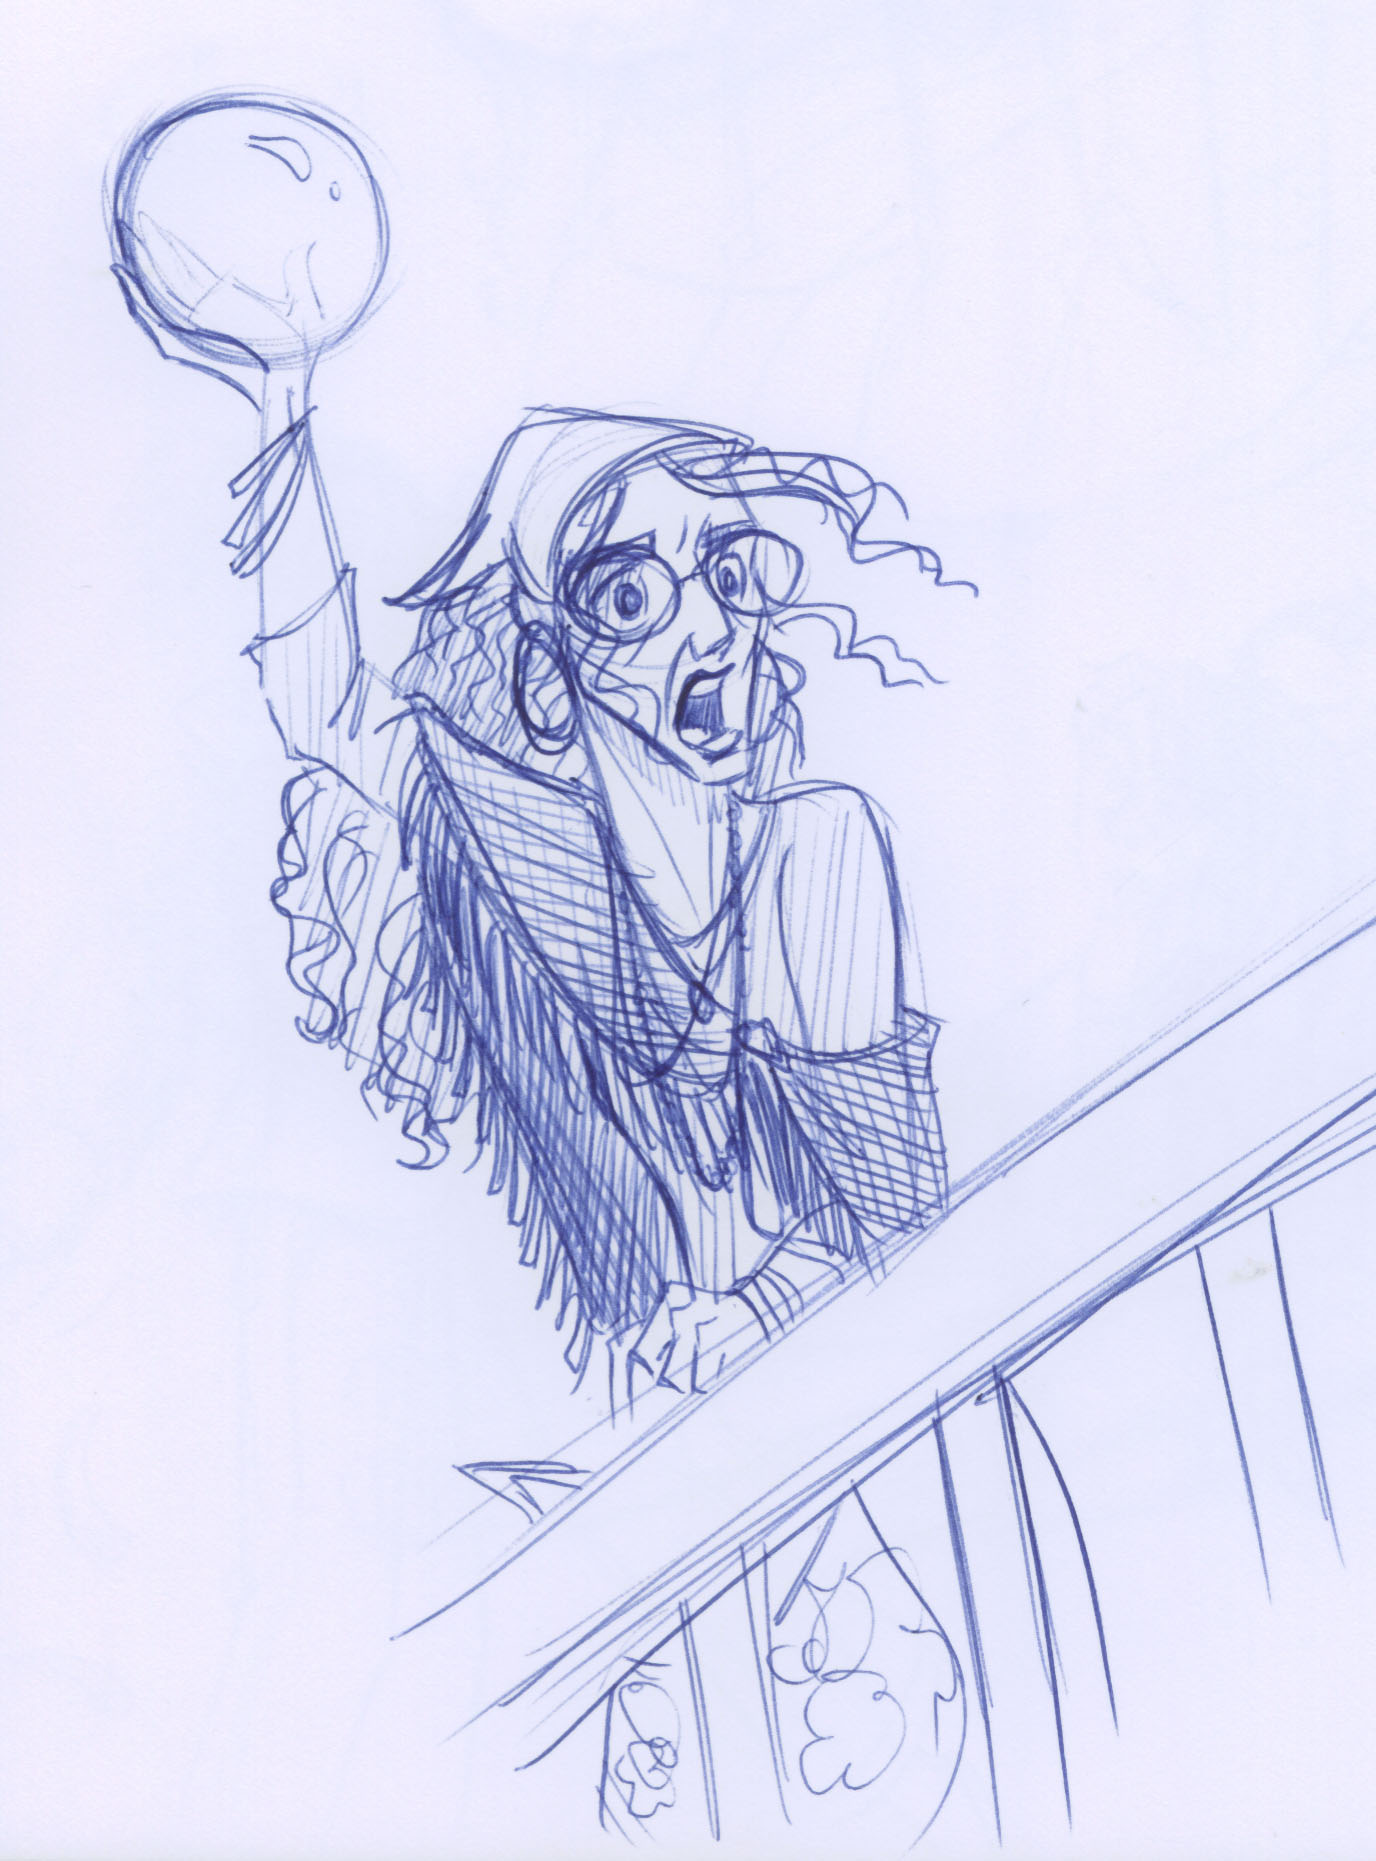 Trelawney joins in the fight by throwing crystal balls at Hogwarts' attackers.